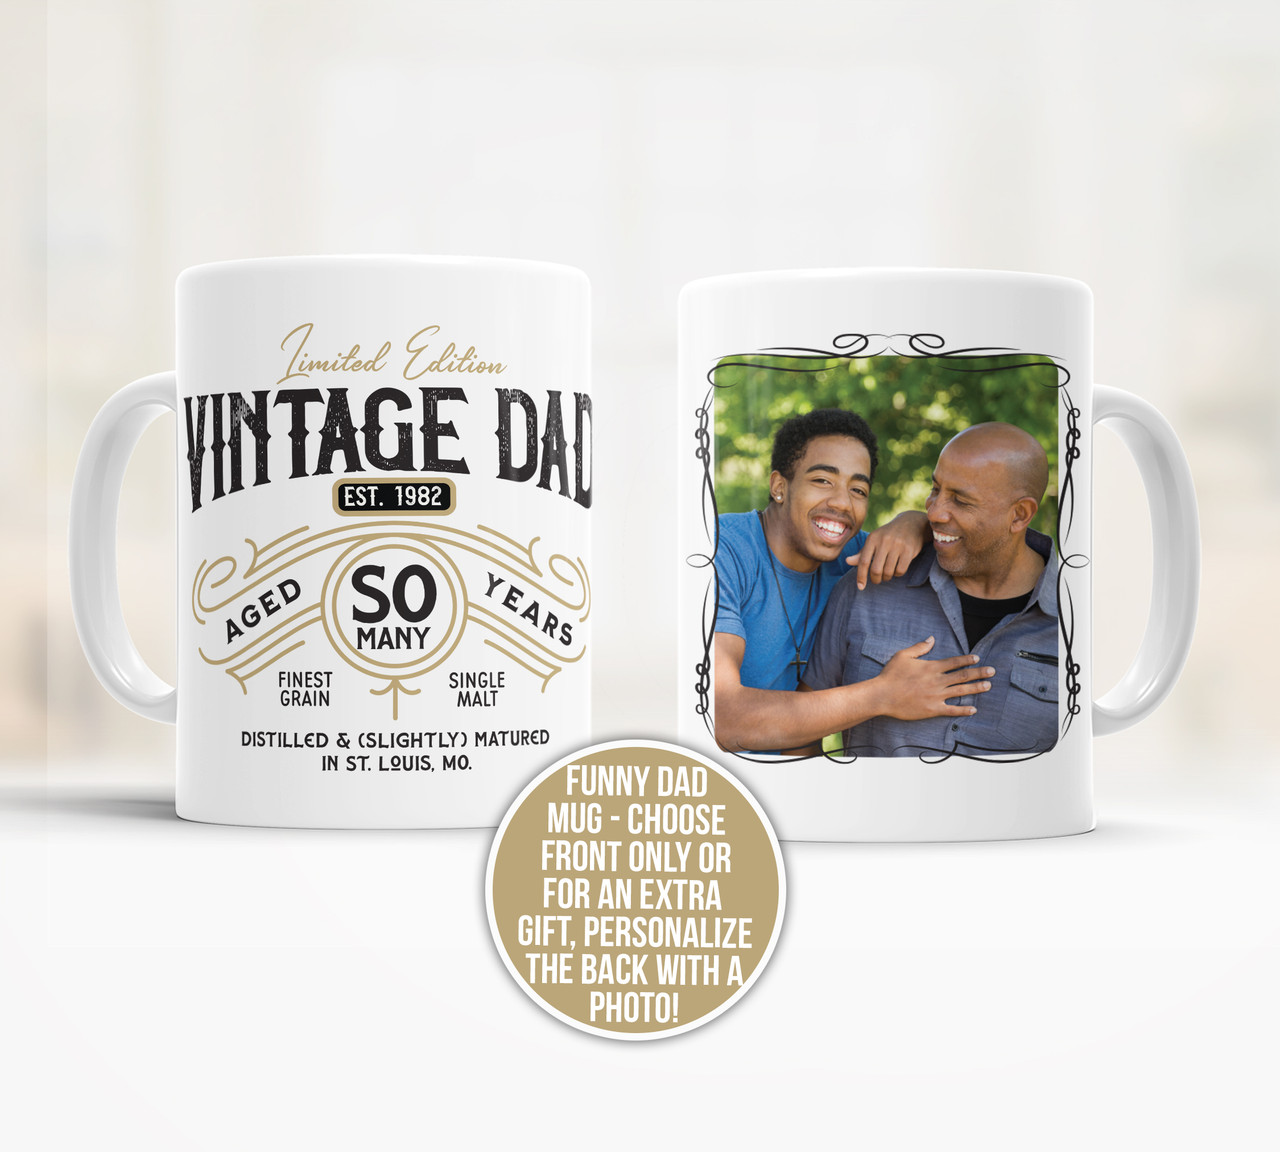 Personalized Coffee Mugs for Him - Definition of a Dad or Grandpa